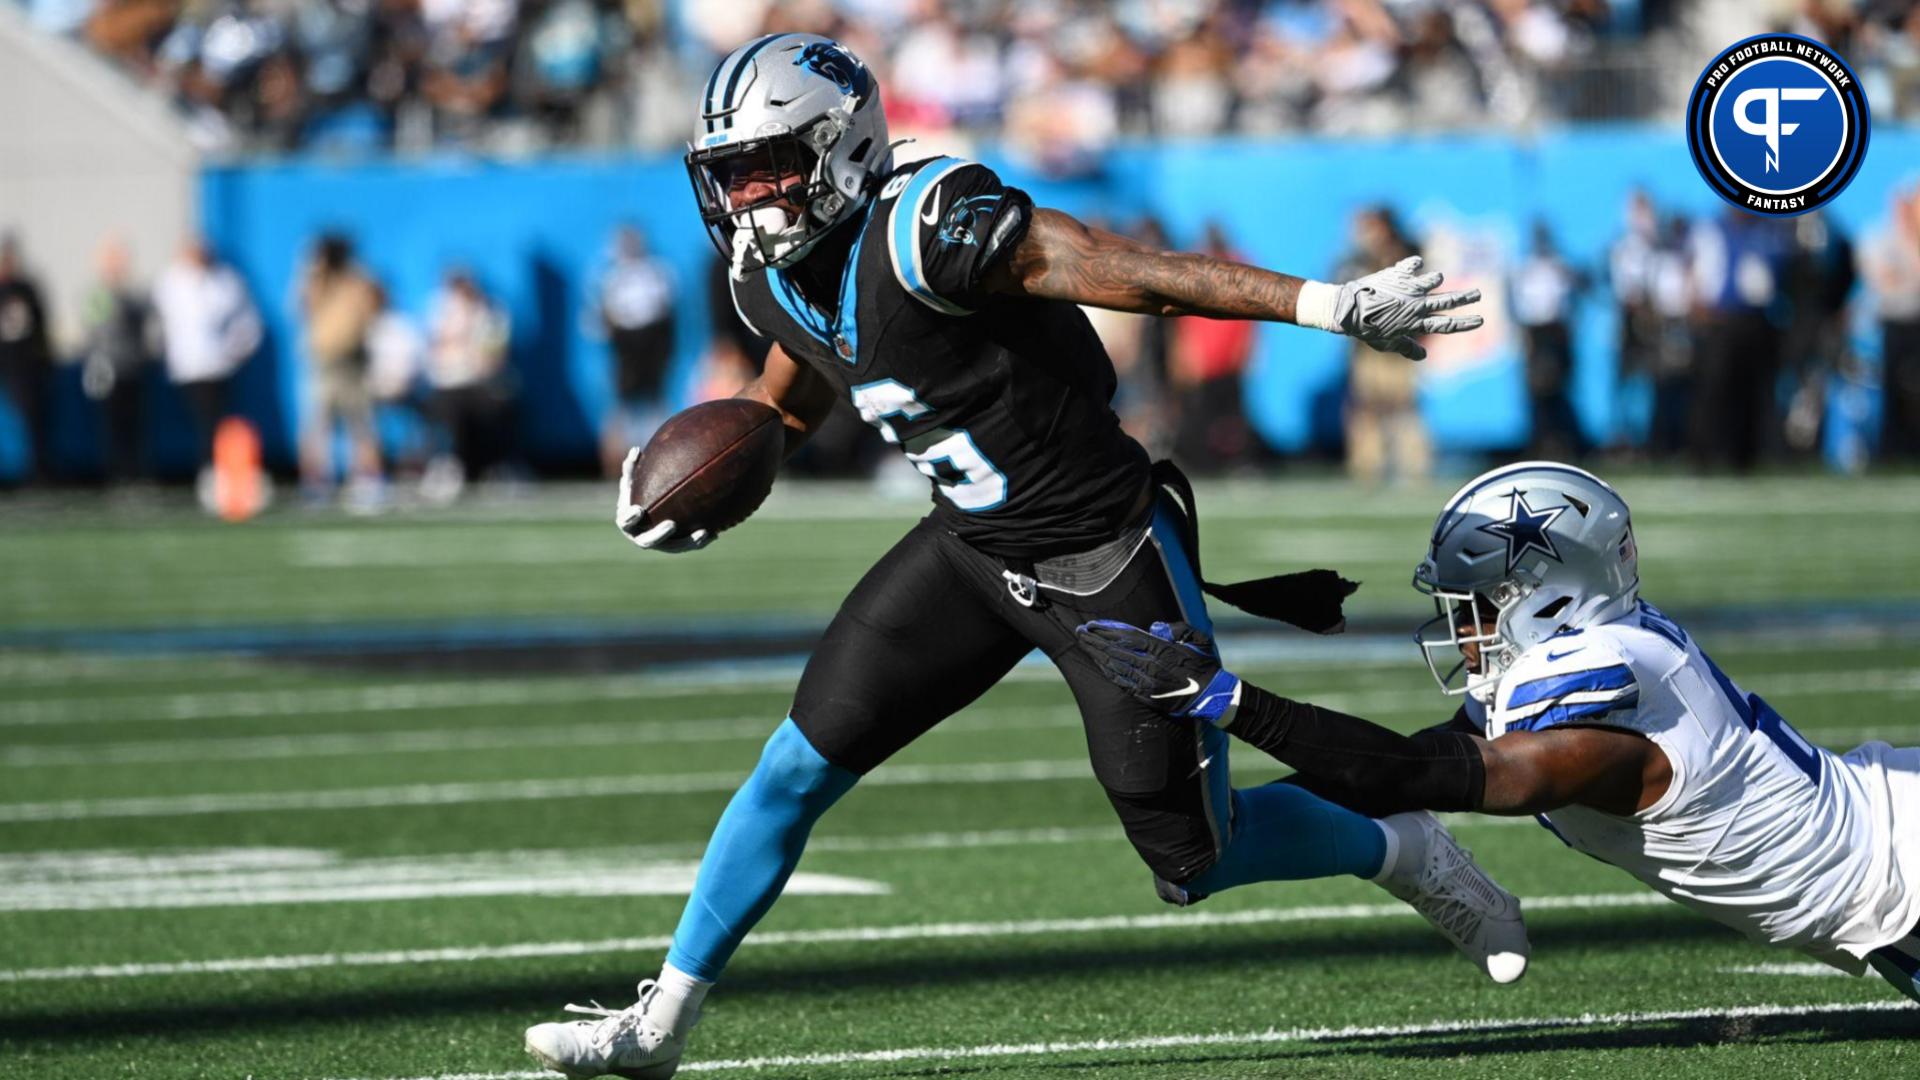 Carolina Panthers running back Miles Sanders (6) with the ball as Dallas Cowboys safety Donovan Wilson (6) defends in the second quarter at Bank of America Stadium.